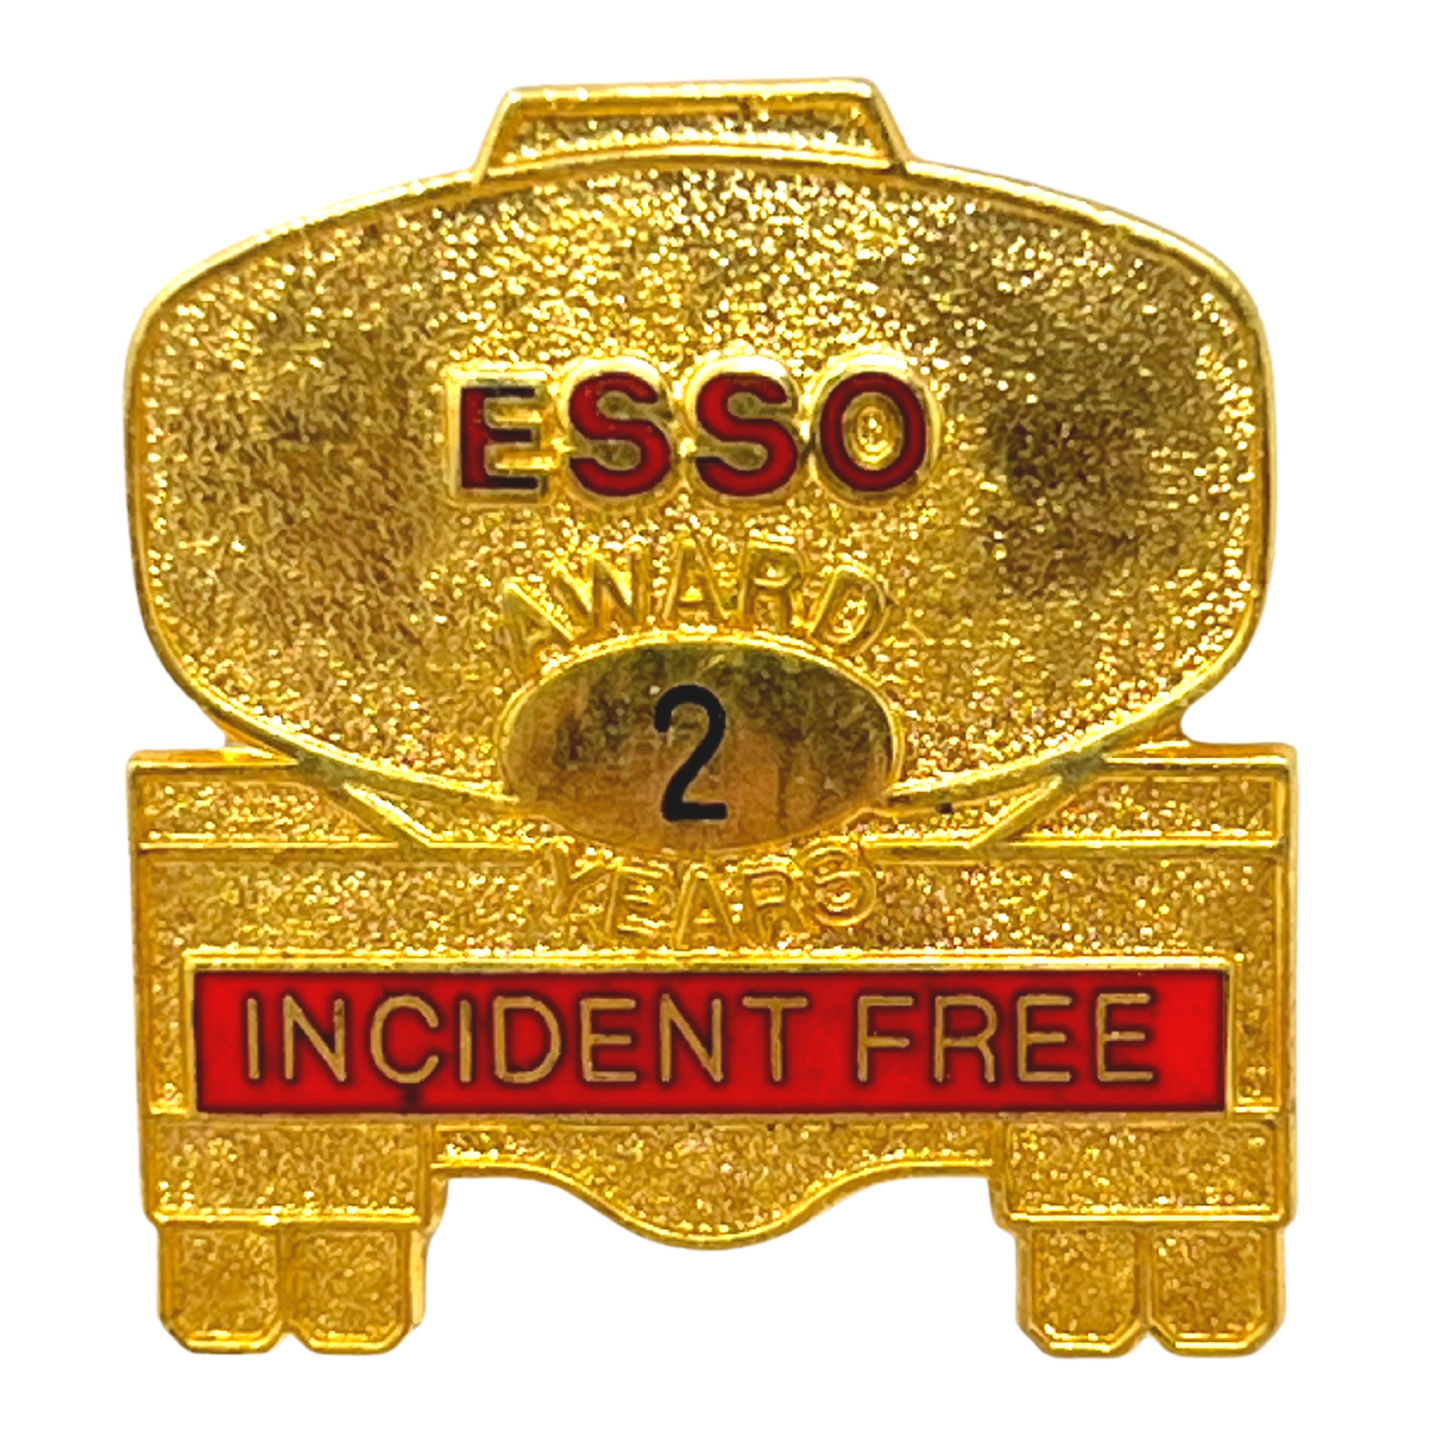 Esso Incident Free Award 2 Year Gas & Oil Lapel Pin